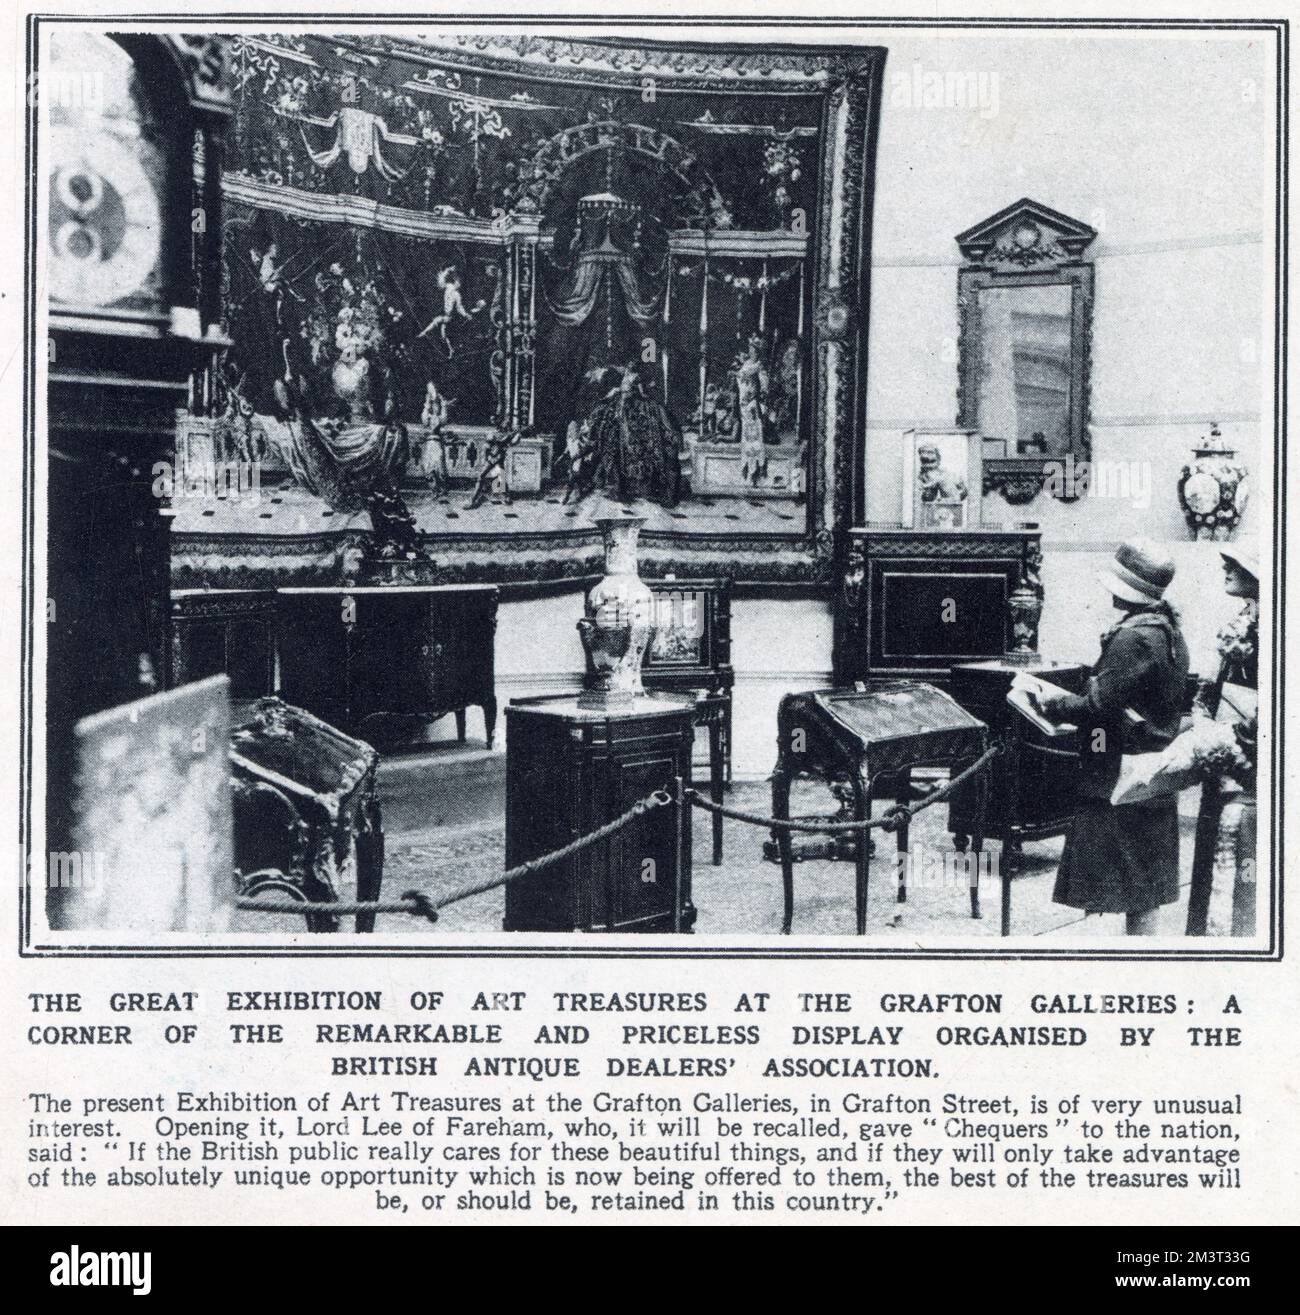 The great exhibition of art treasures at the Grafton Galleries: a corner of the remarkable and priceless display organised by the British Antique Dealers' Association. Stock Photo